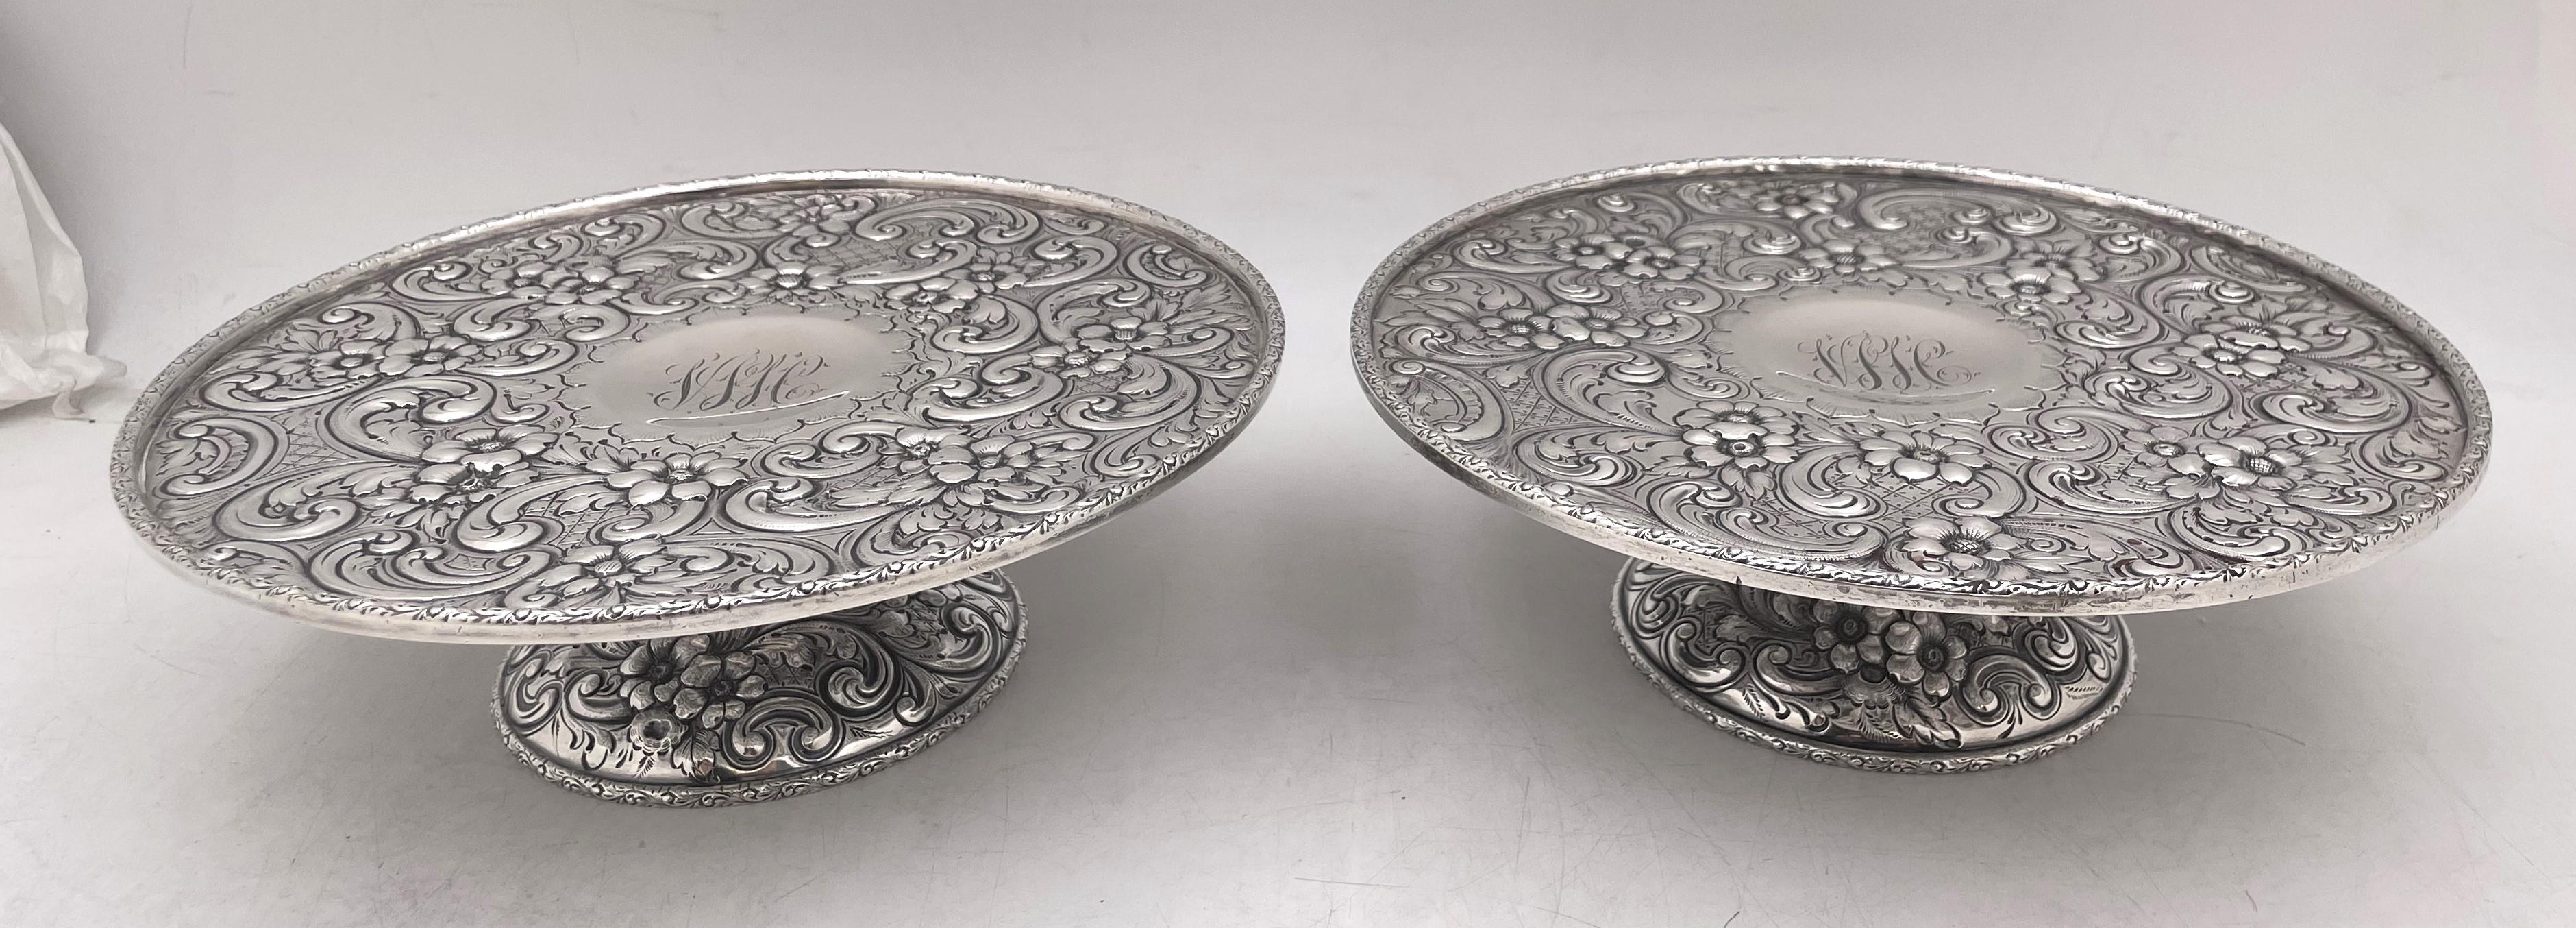 Dominick & Haff pair of sterling silver compote, tazze or footed bowls, from 1908, in Art Nouveau style, showcasing floral and curvilinear palmette motifs. They measure 8 3/4'' in diameter by 2 7/8'' in height, weigh 39.8 troy ounces, and bear